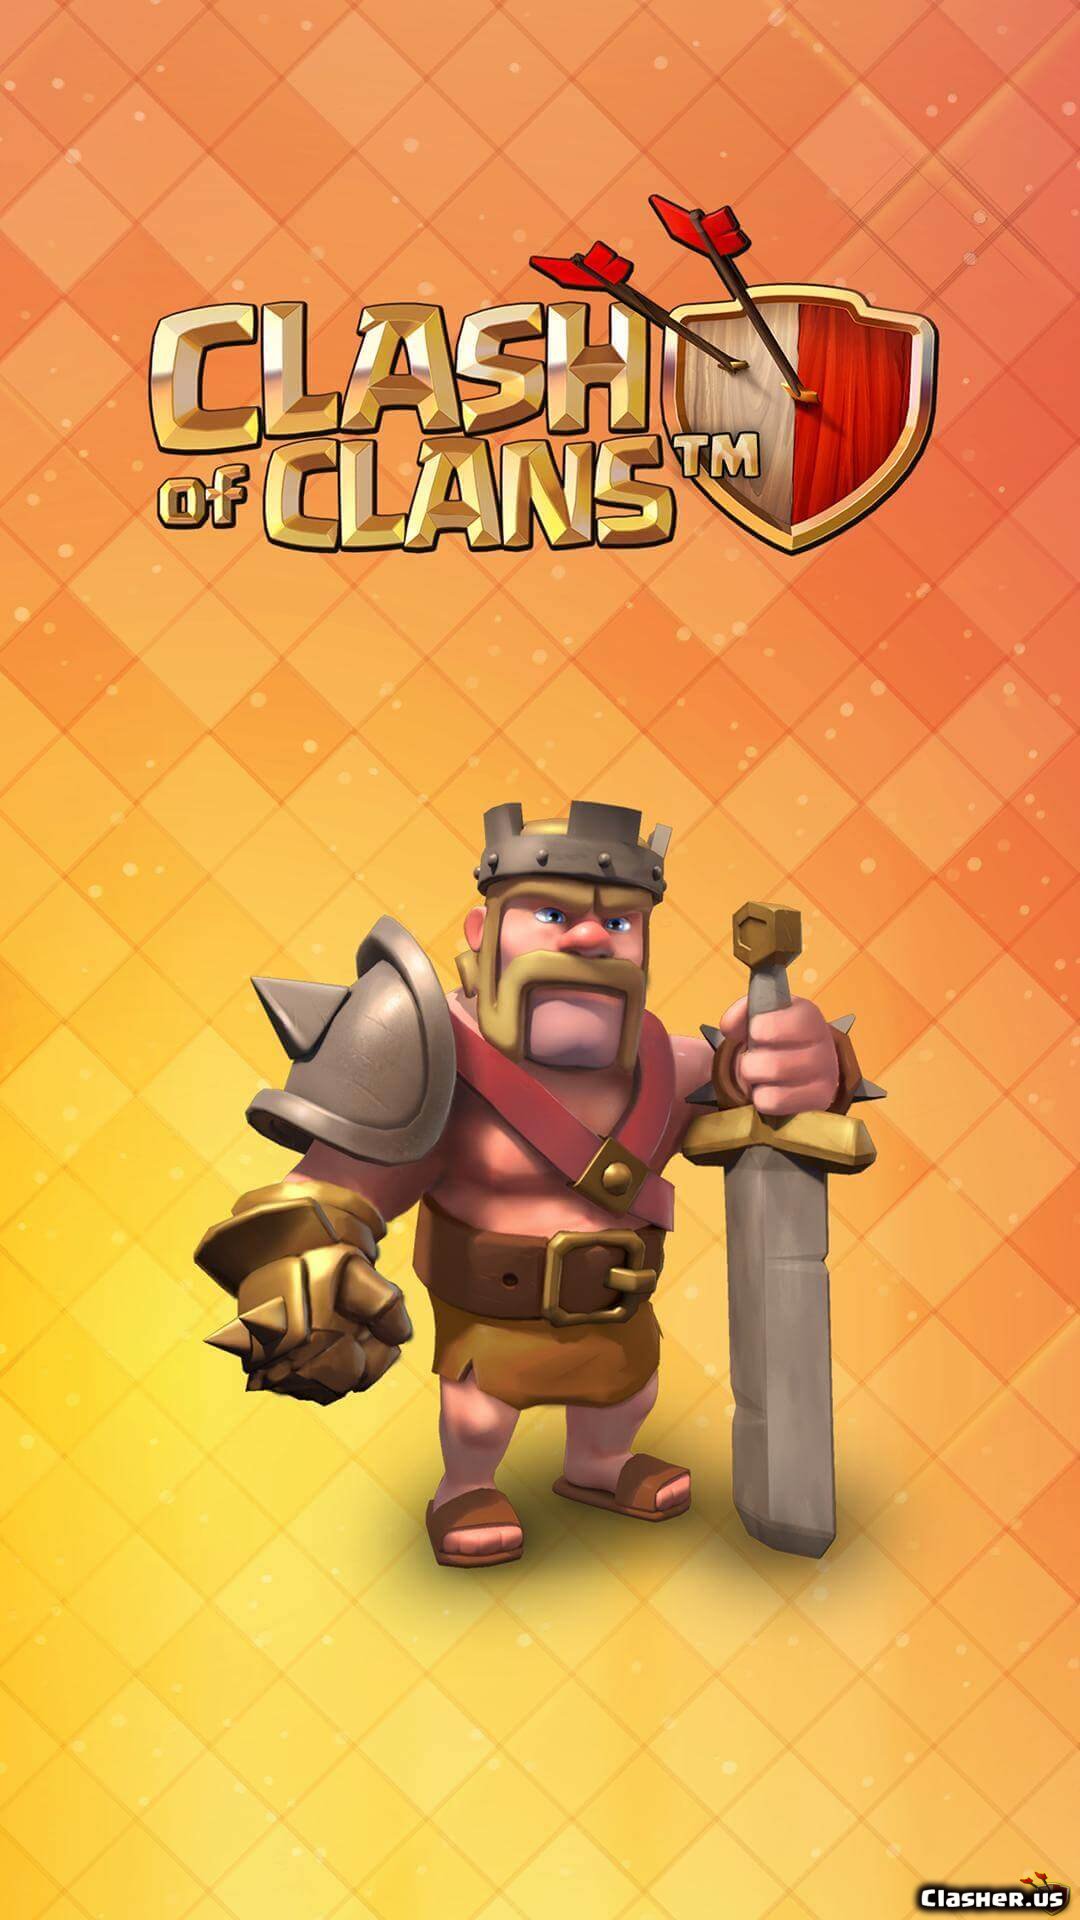 Barbarian King design art - Clash of Clans Wallpapers